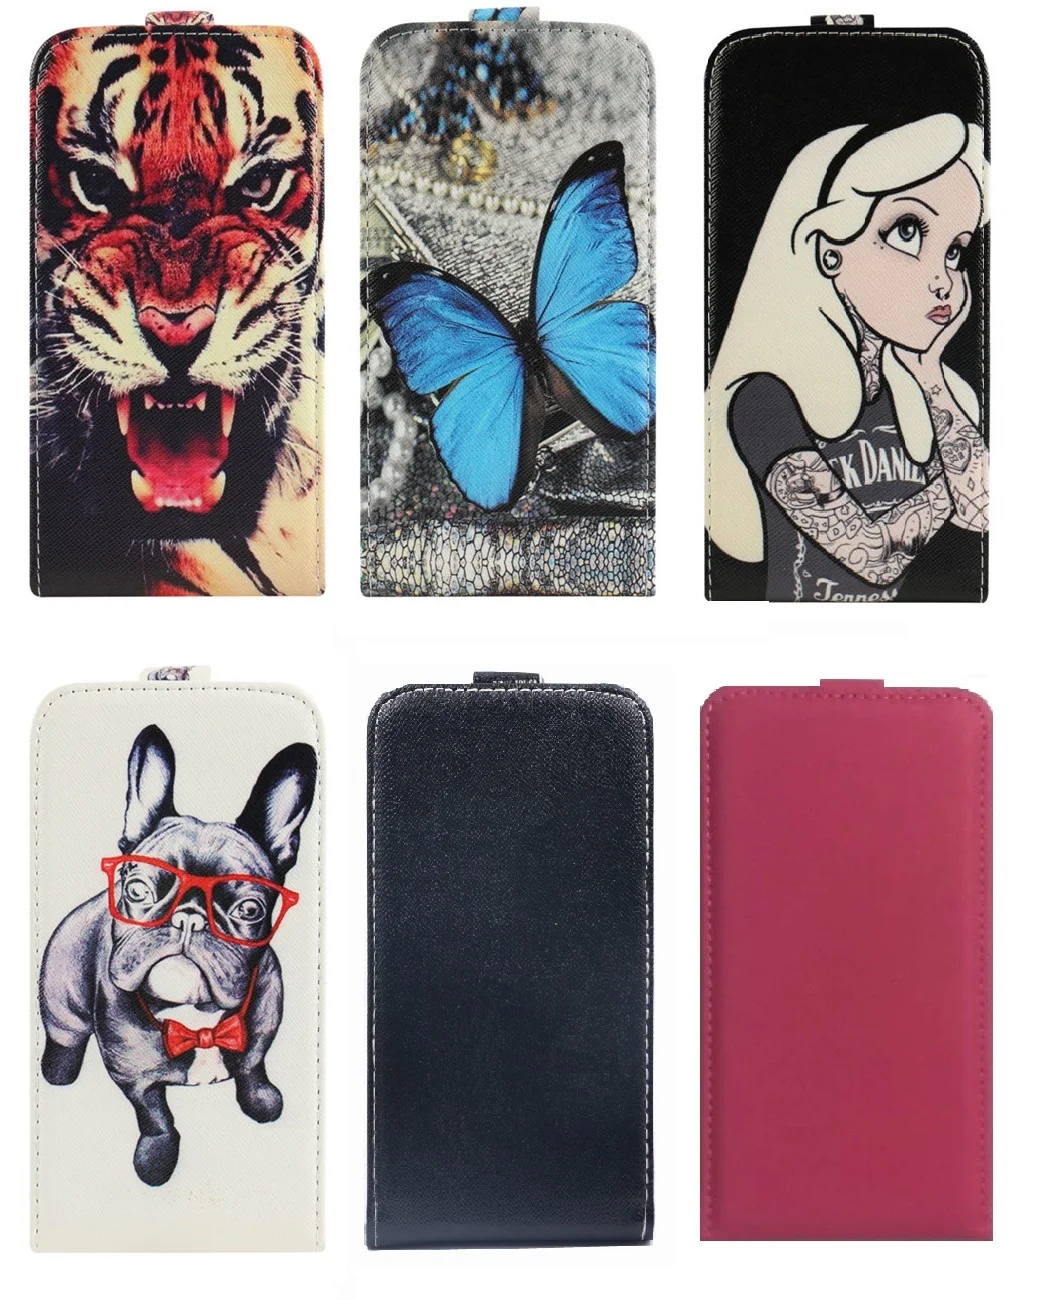 

Yooyour Case Cover Printed Flip PU Leather For Micromax D306 D333 D303 D320 FOR Micromax D340 D305 D200